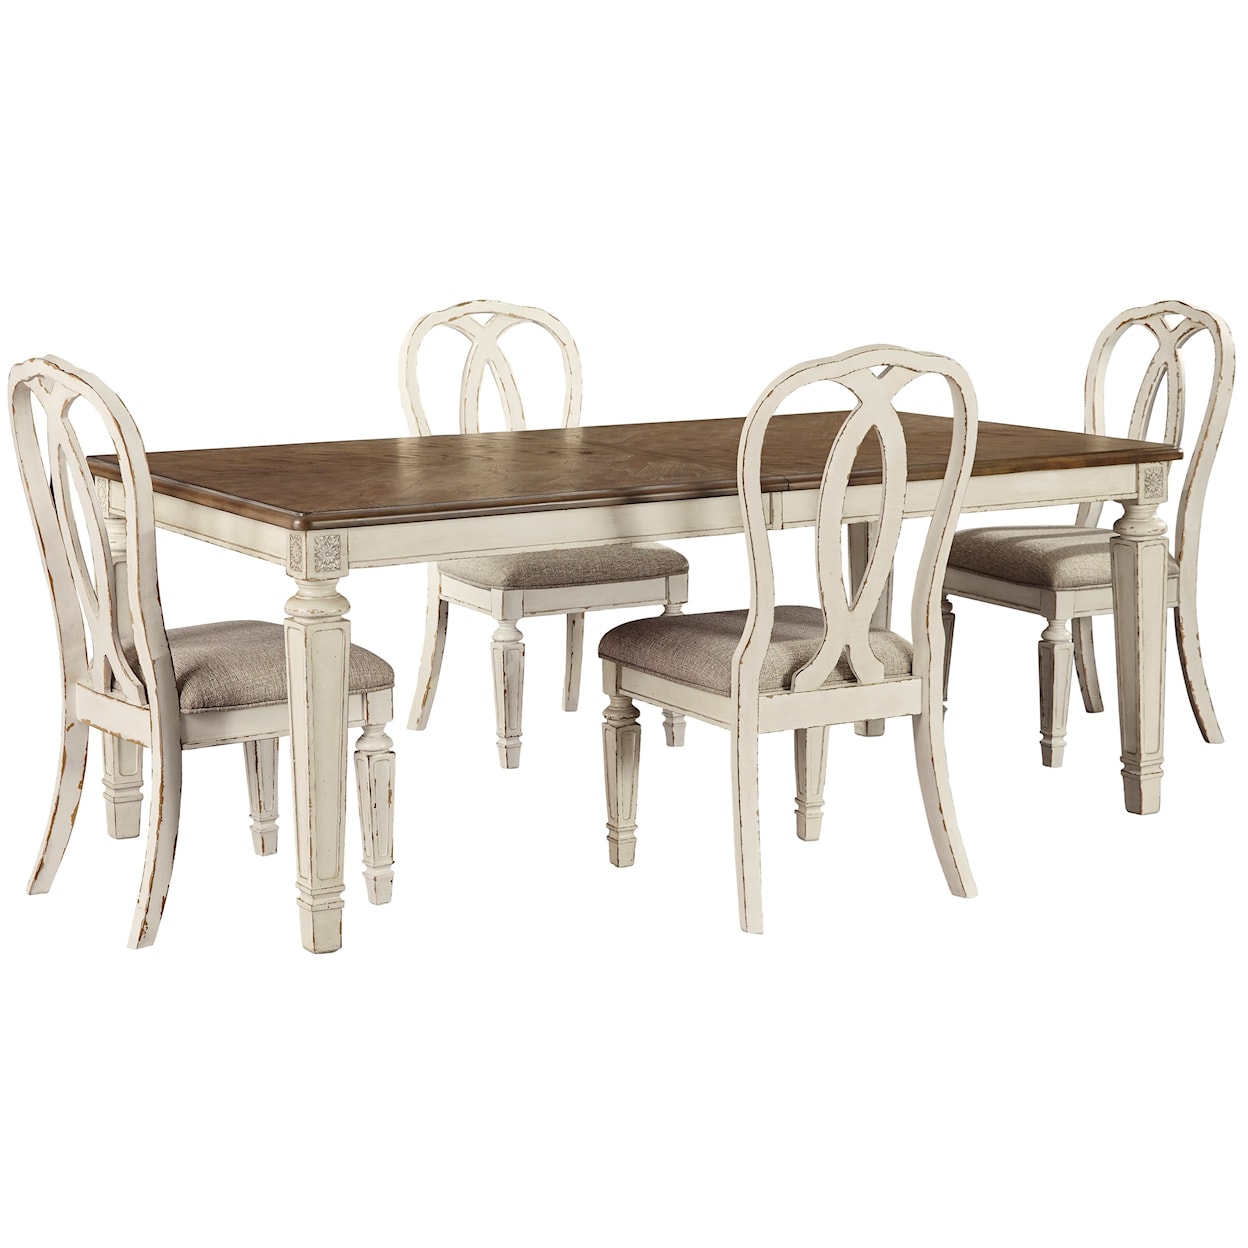 Ashley Furniture Signature Design Realyn 5-Piece Rectangular Table and Chair Set